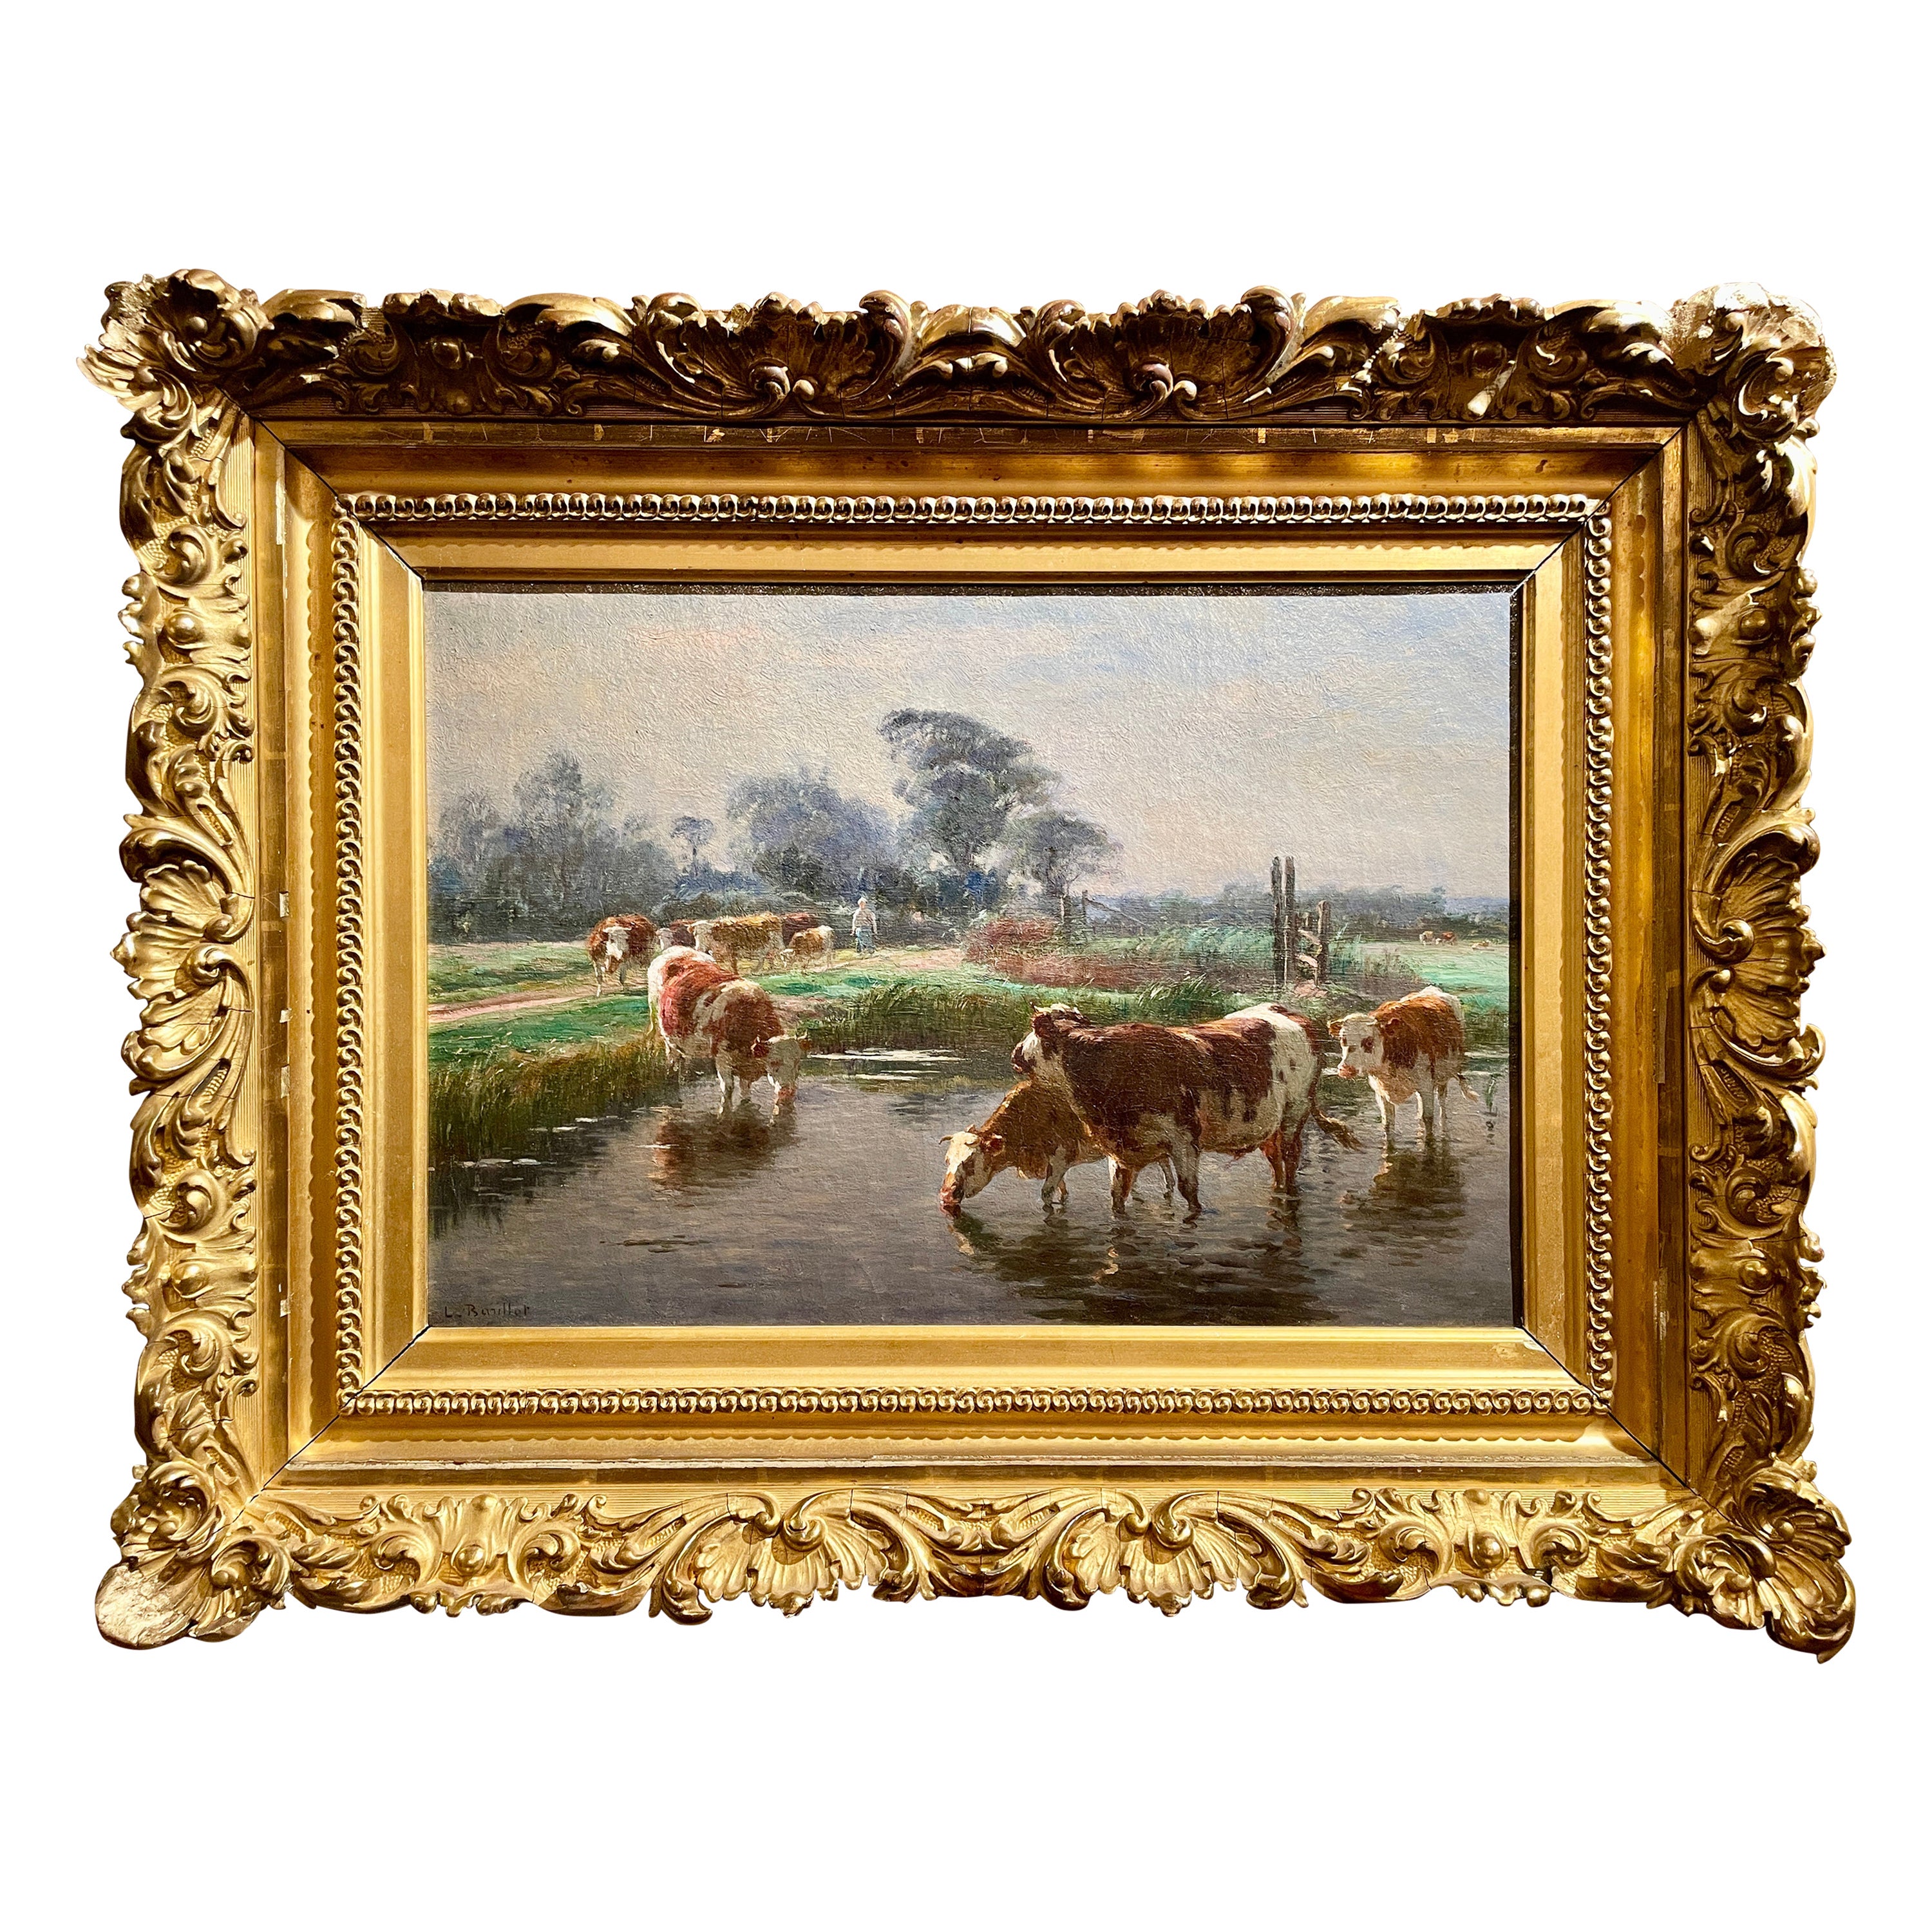 Antique French Oil on Canvas Landscape Painting Signed Léon Barillot, Circa 1890